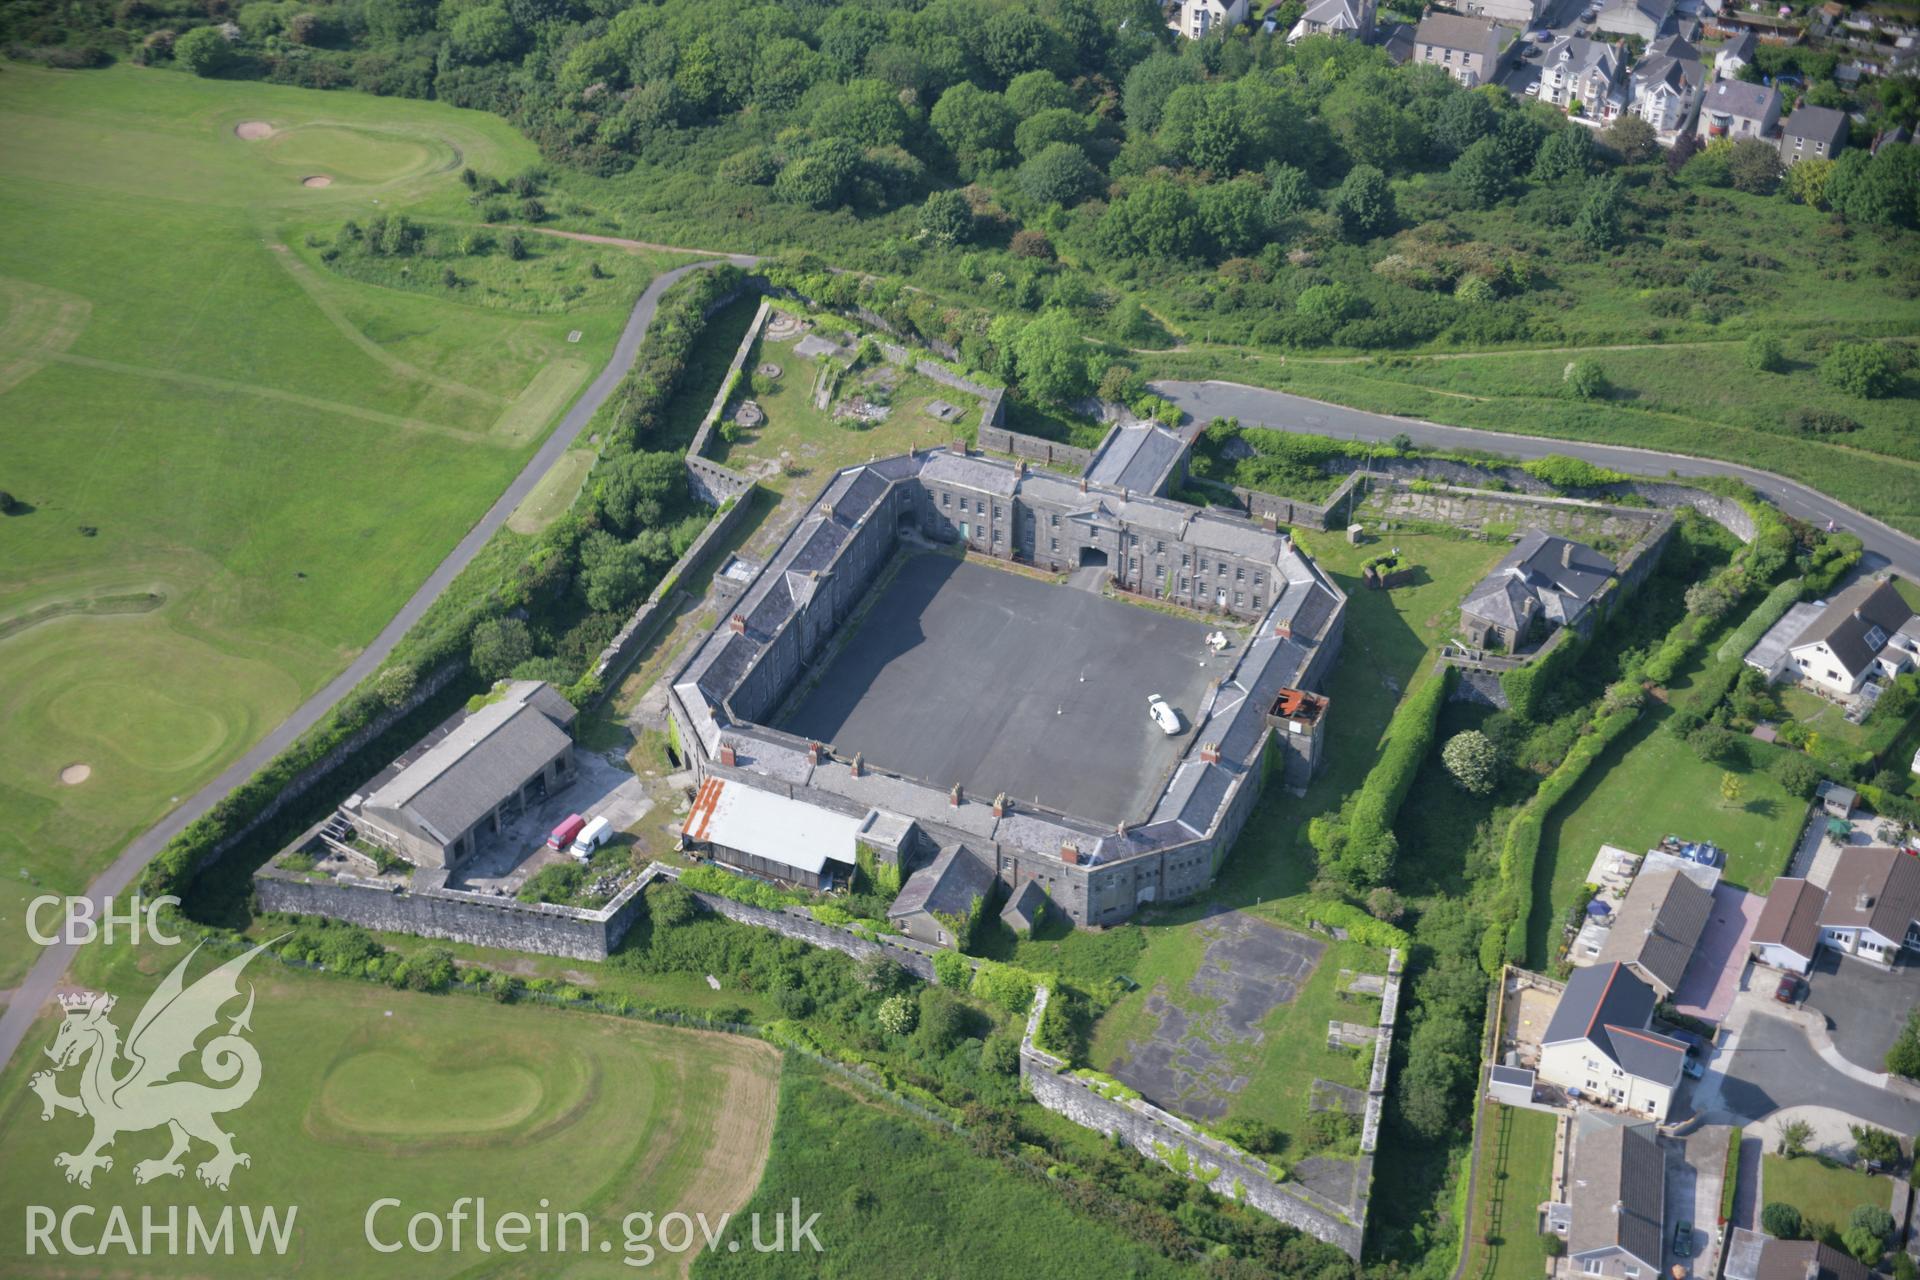 RCAHMW colour oblique aerial photograph of Barrack Hill, Pembroke Dockyard from the south-east. Taken on 08 June 2006 by Toby Driver.